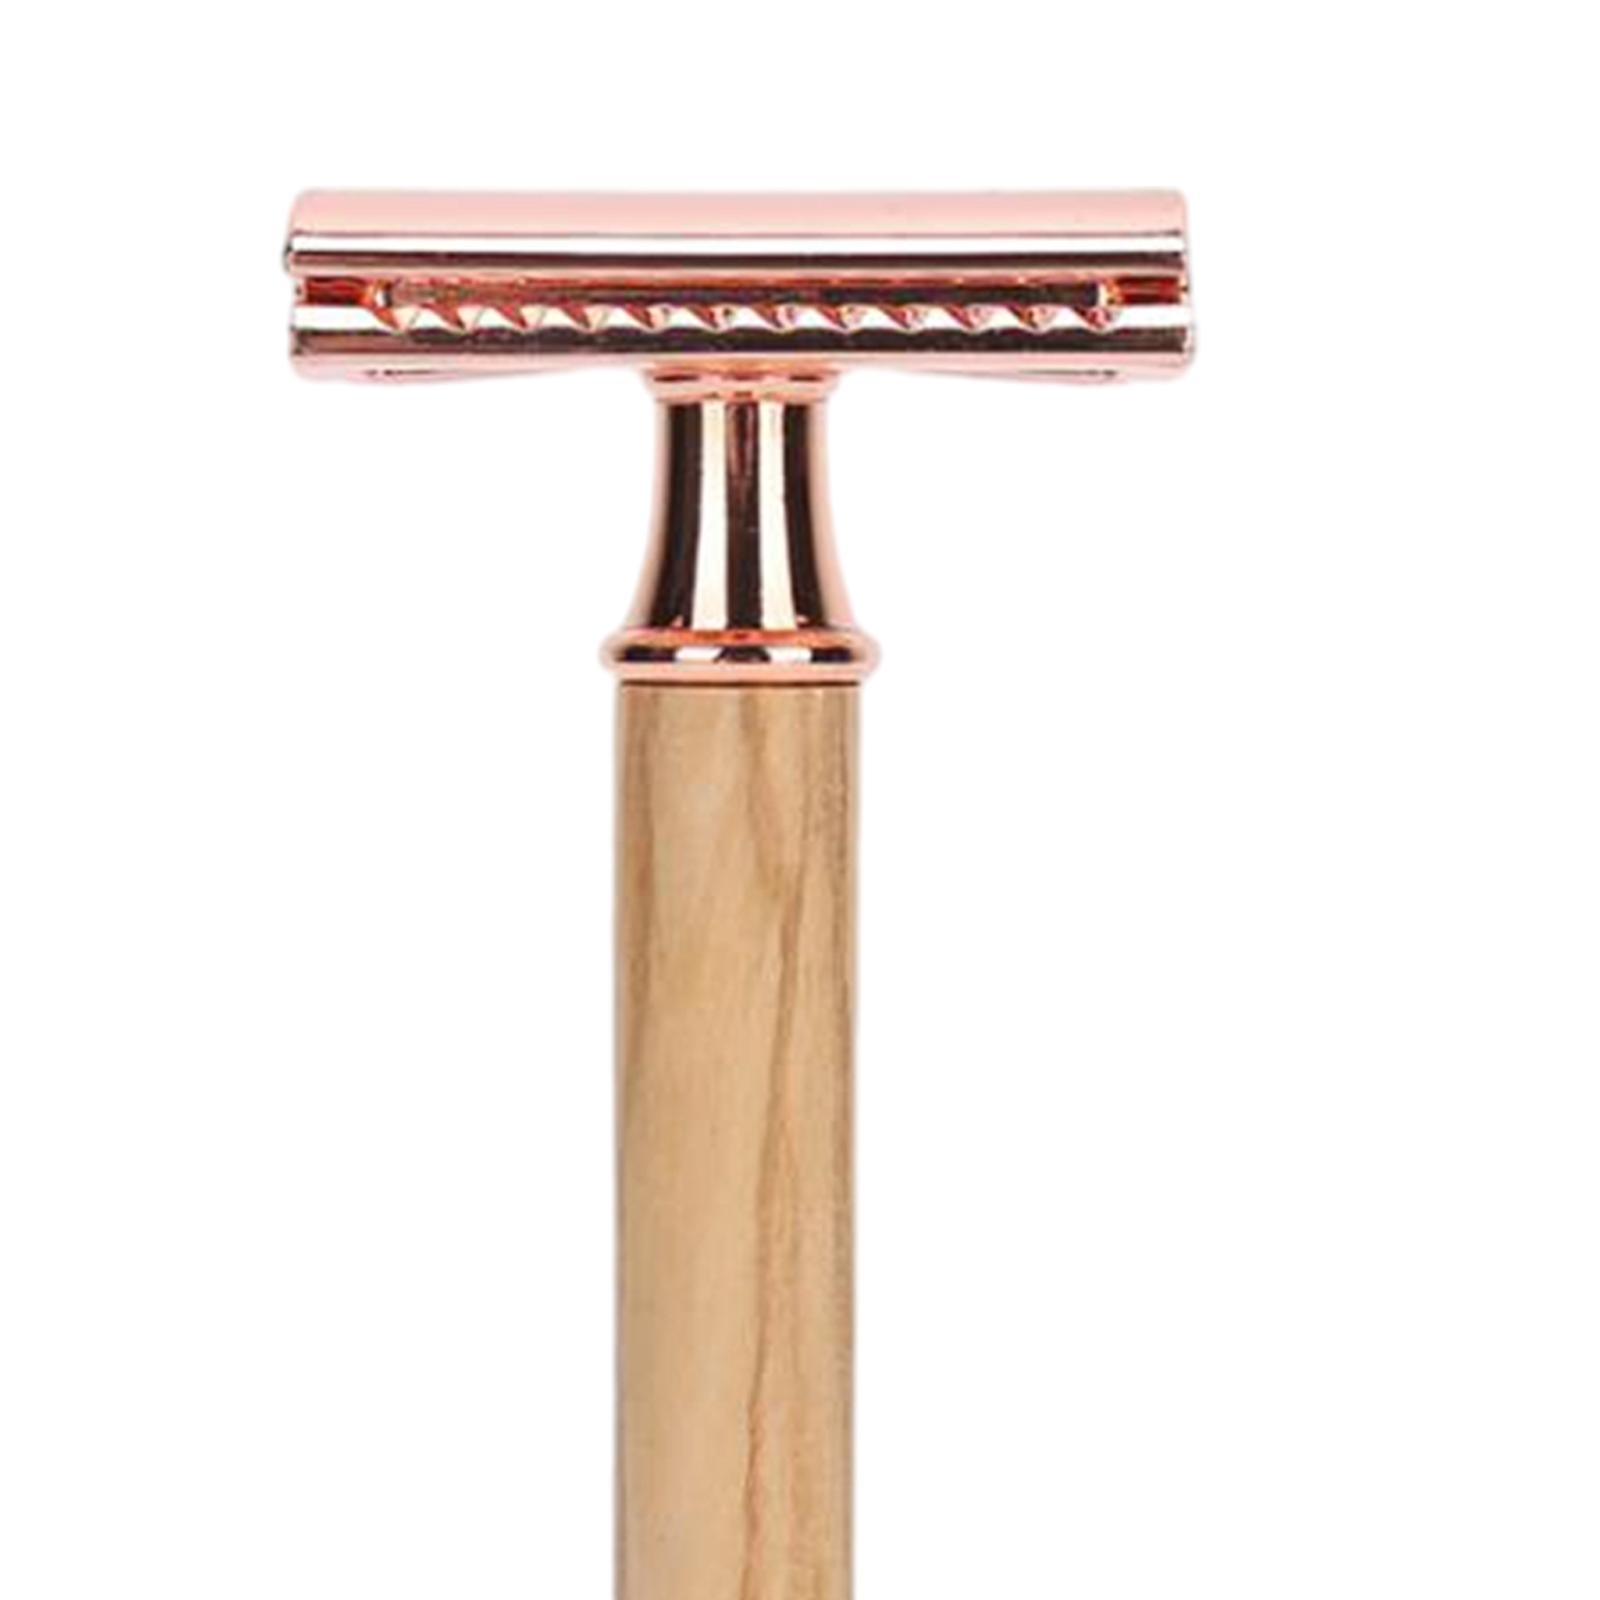 Double Edge Safety Razors Detachable Classic Razors for Barbershop Dad Gifts Rose golden